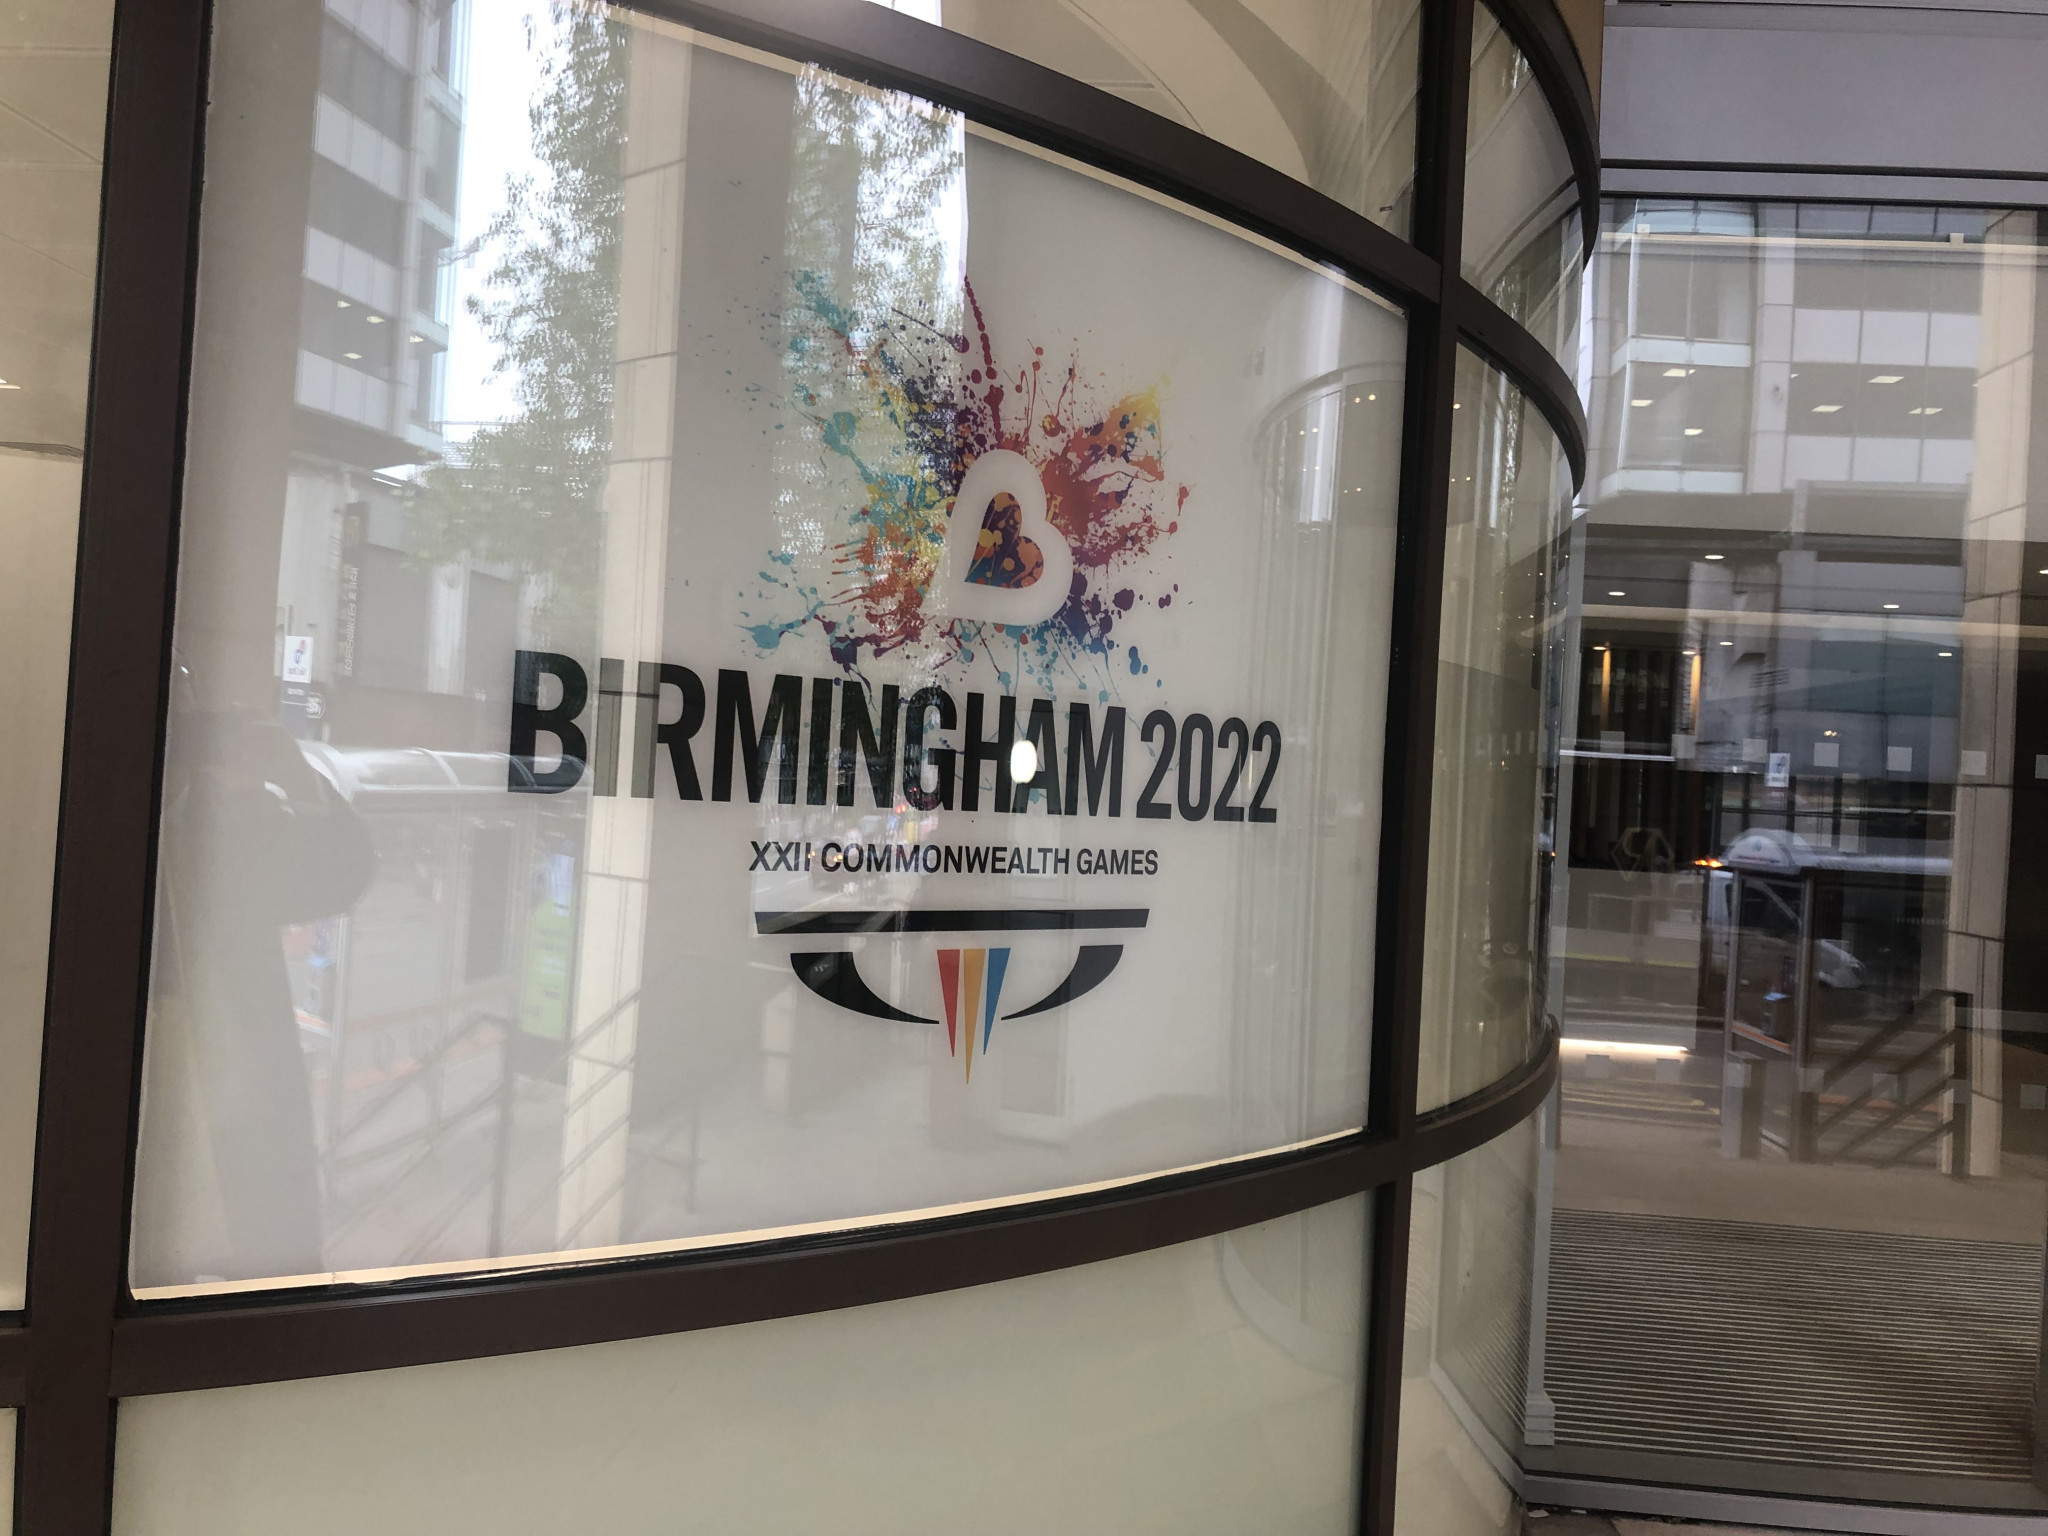 Birmingham 2022 budget still not finalised but announcement expected "imminently"